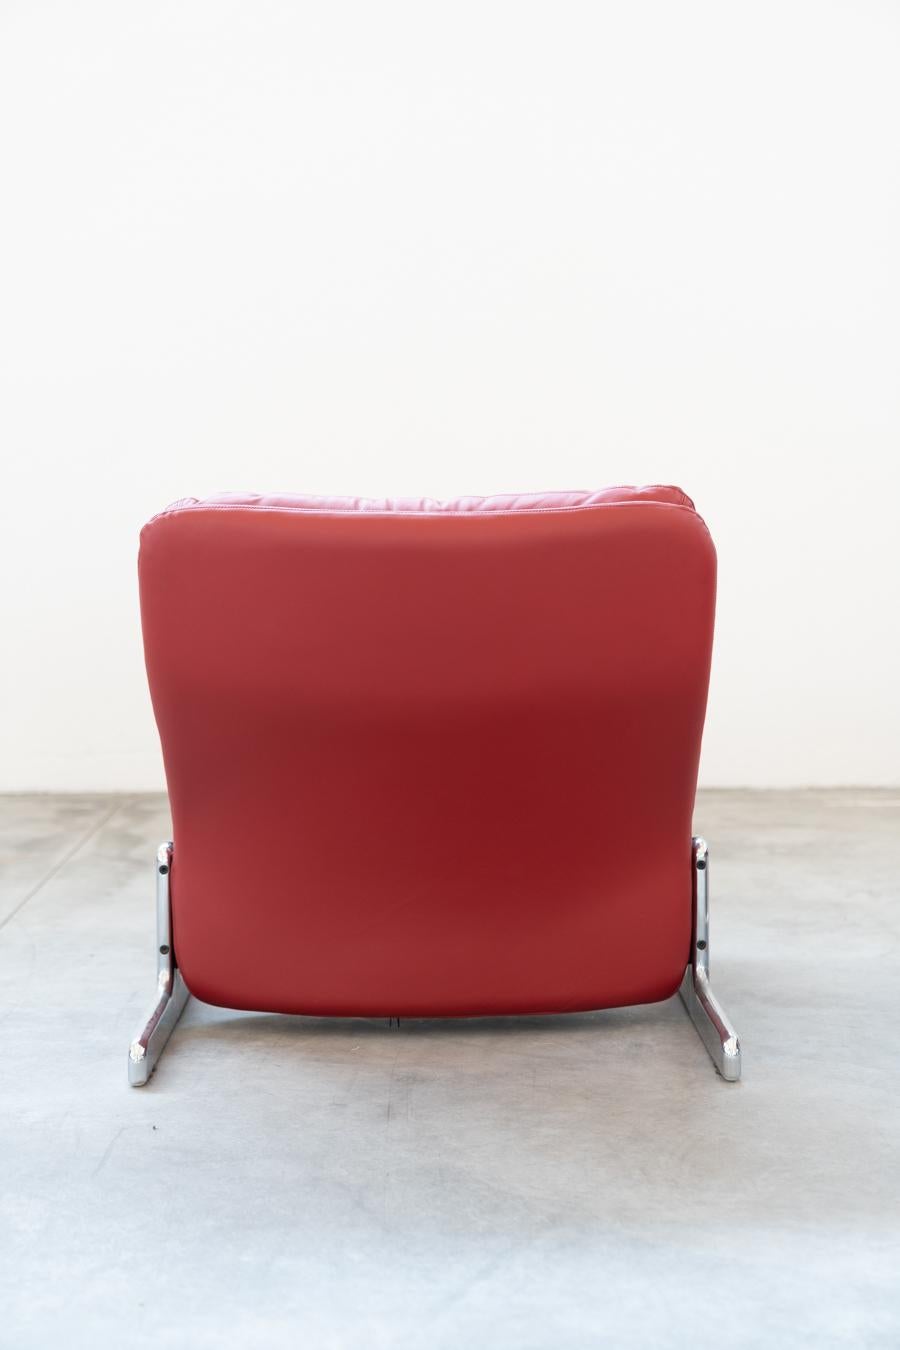 Red leather armchair and footstool, Vitelli and Ammannati, for Brunati 70/80s For Sale 11